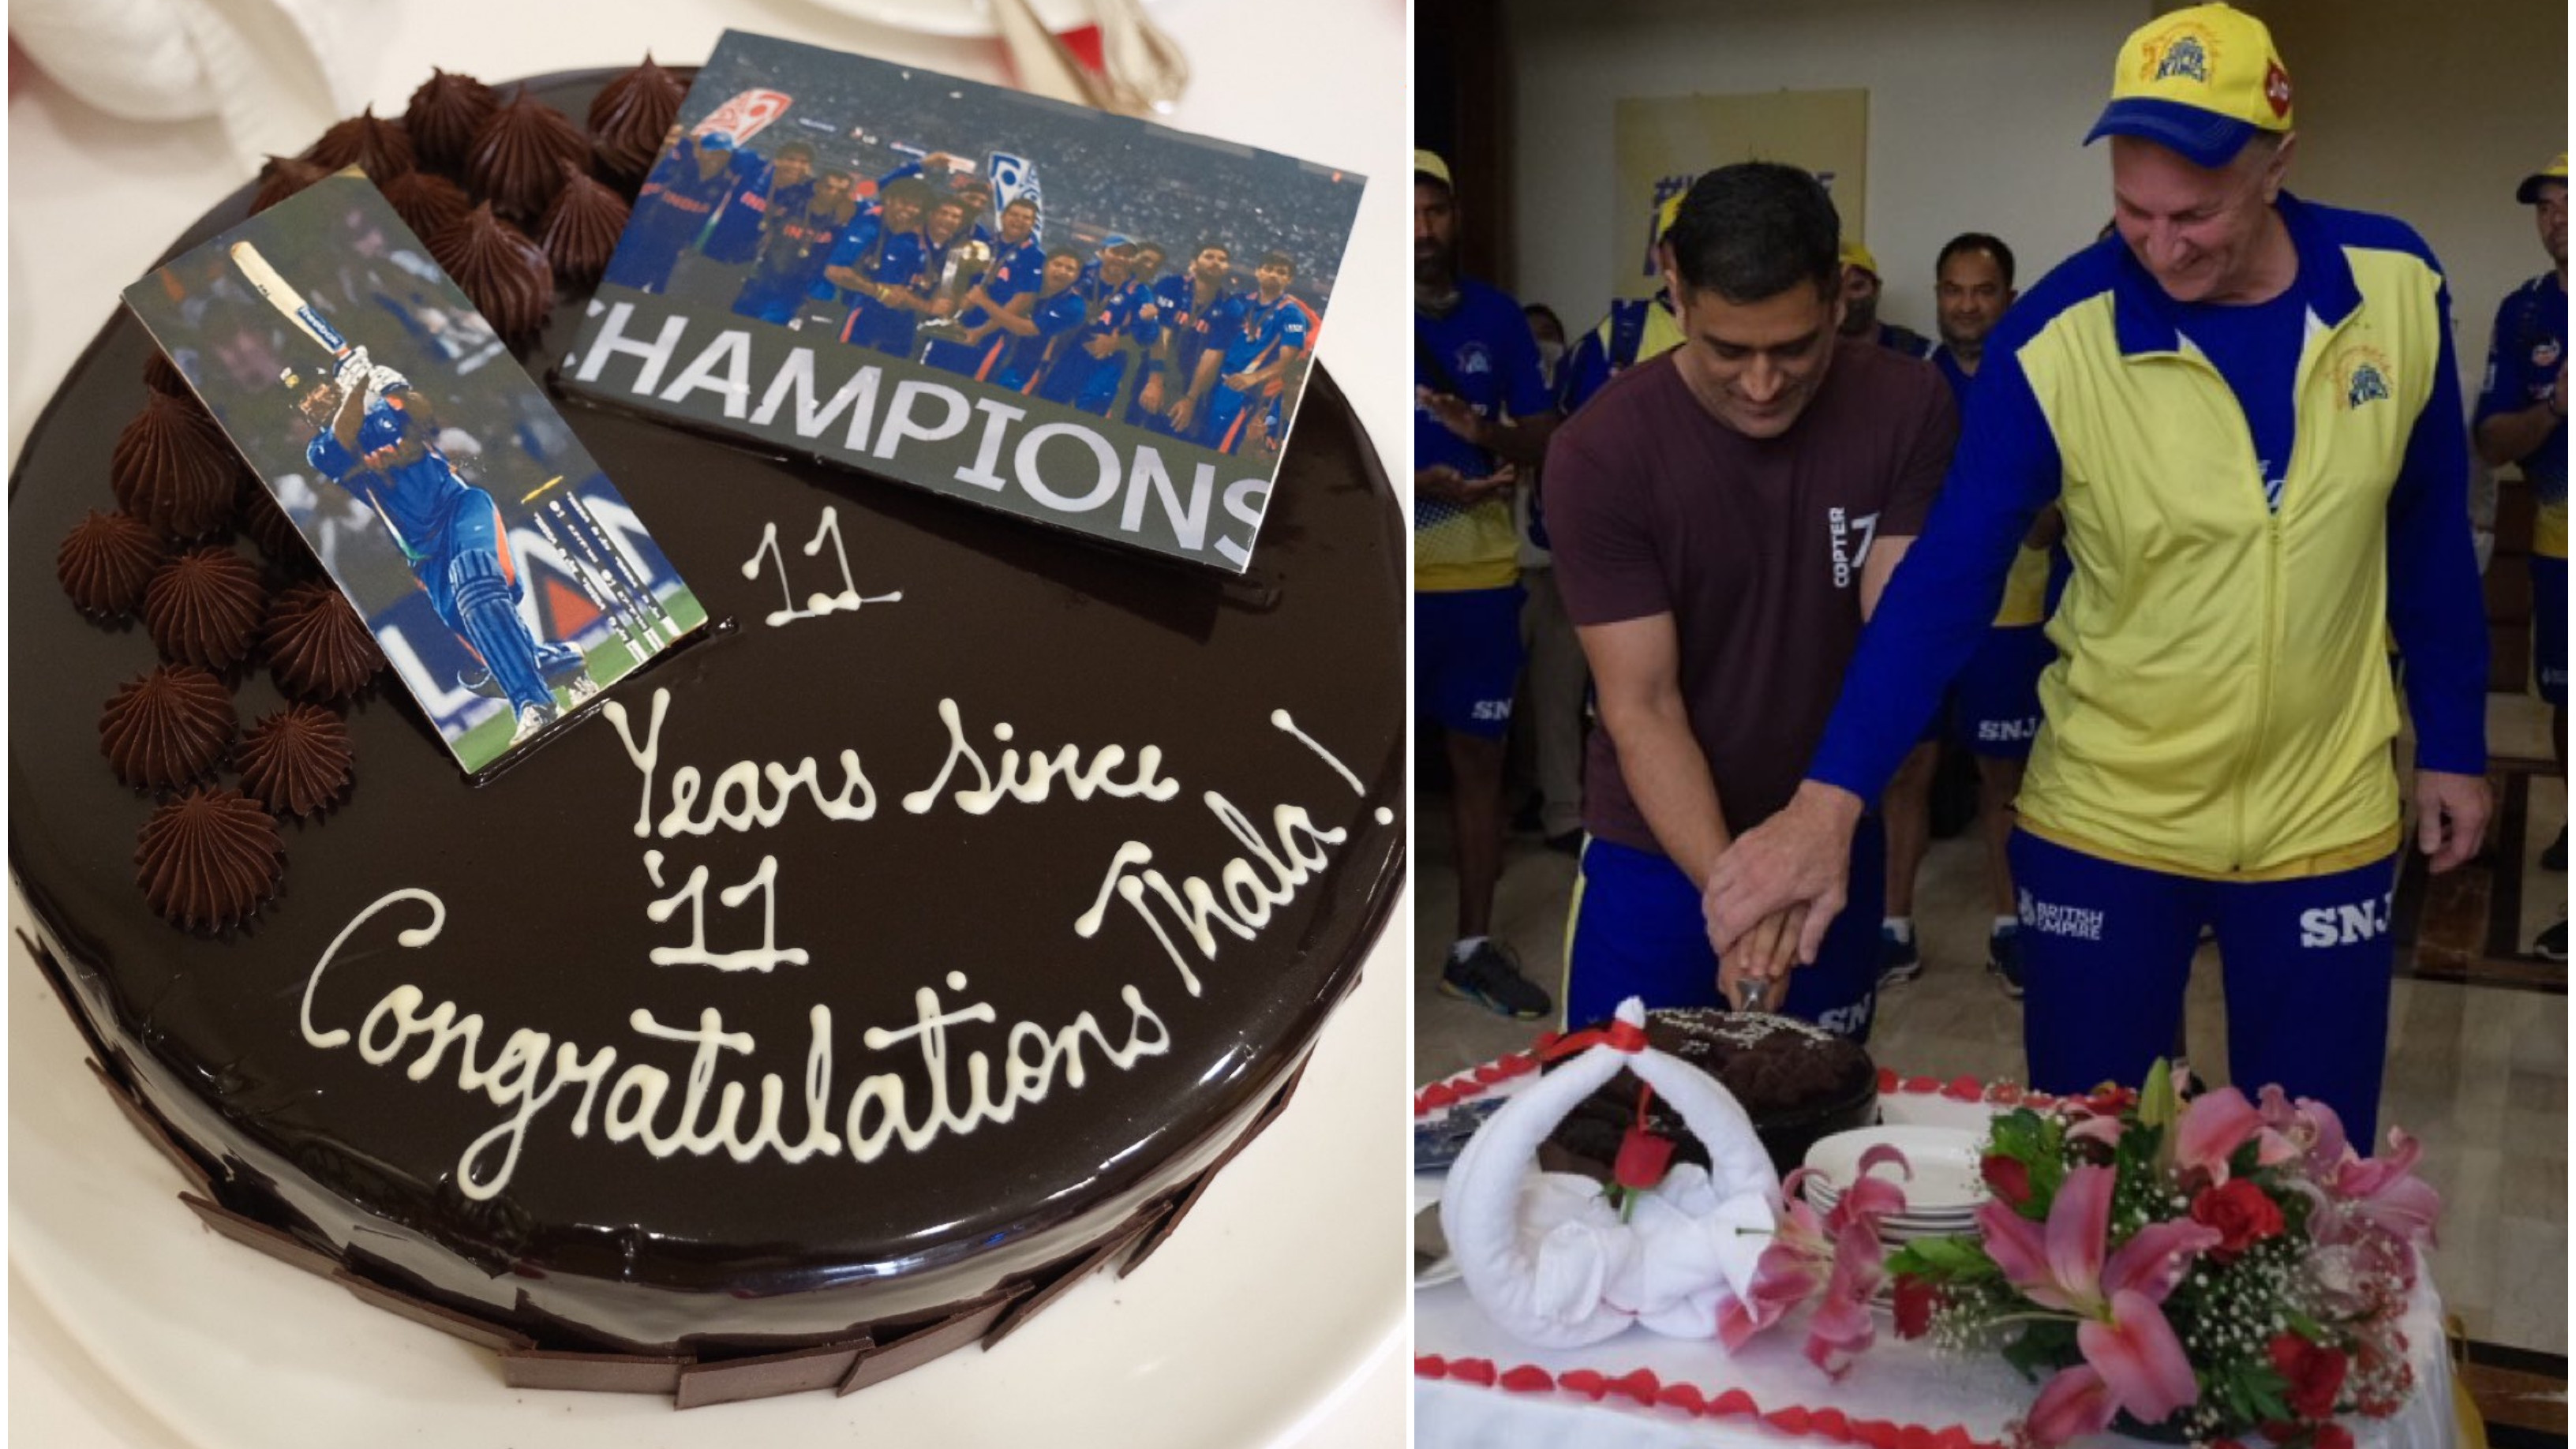 WATCH: MS Dhoni cuts the cake in CSK’s change room on 11th anniversary of India’s 2011 World Cup triumph